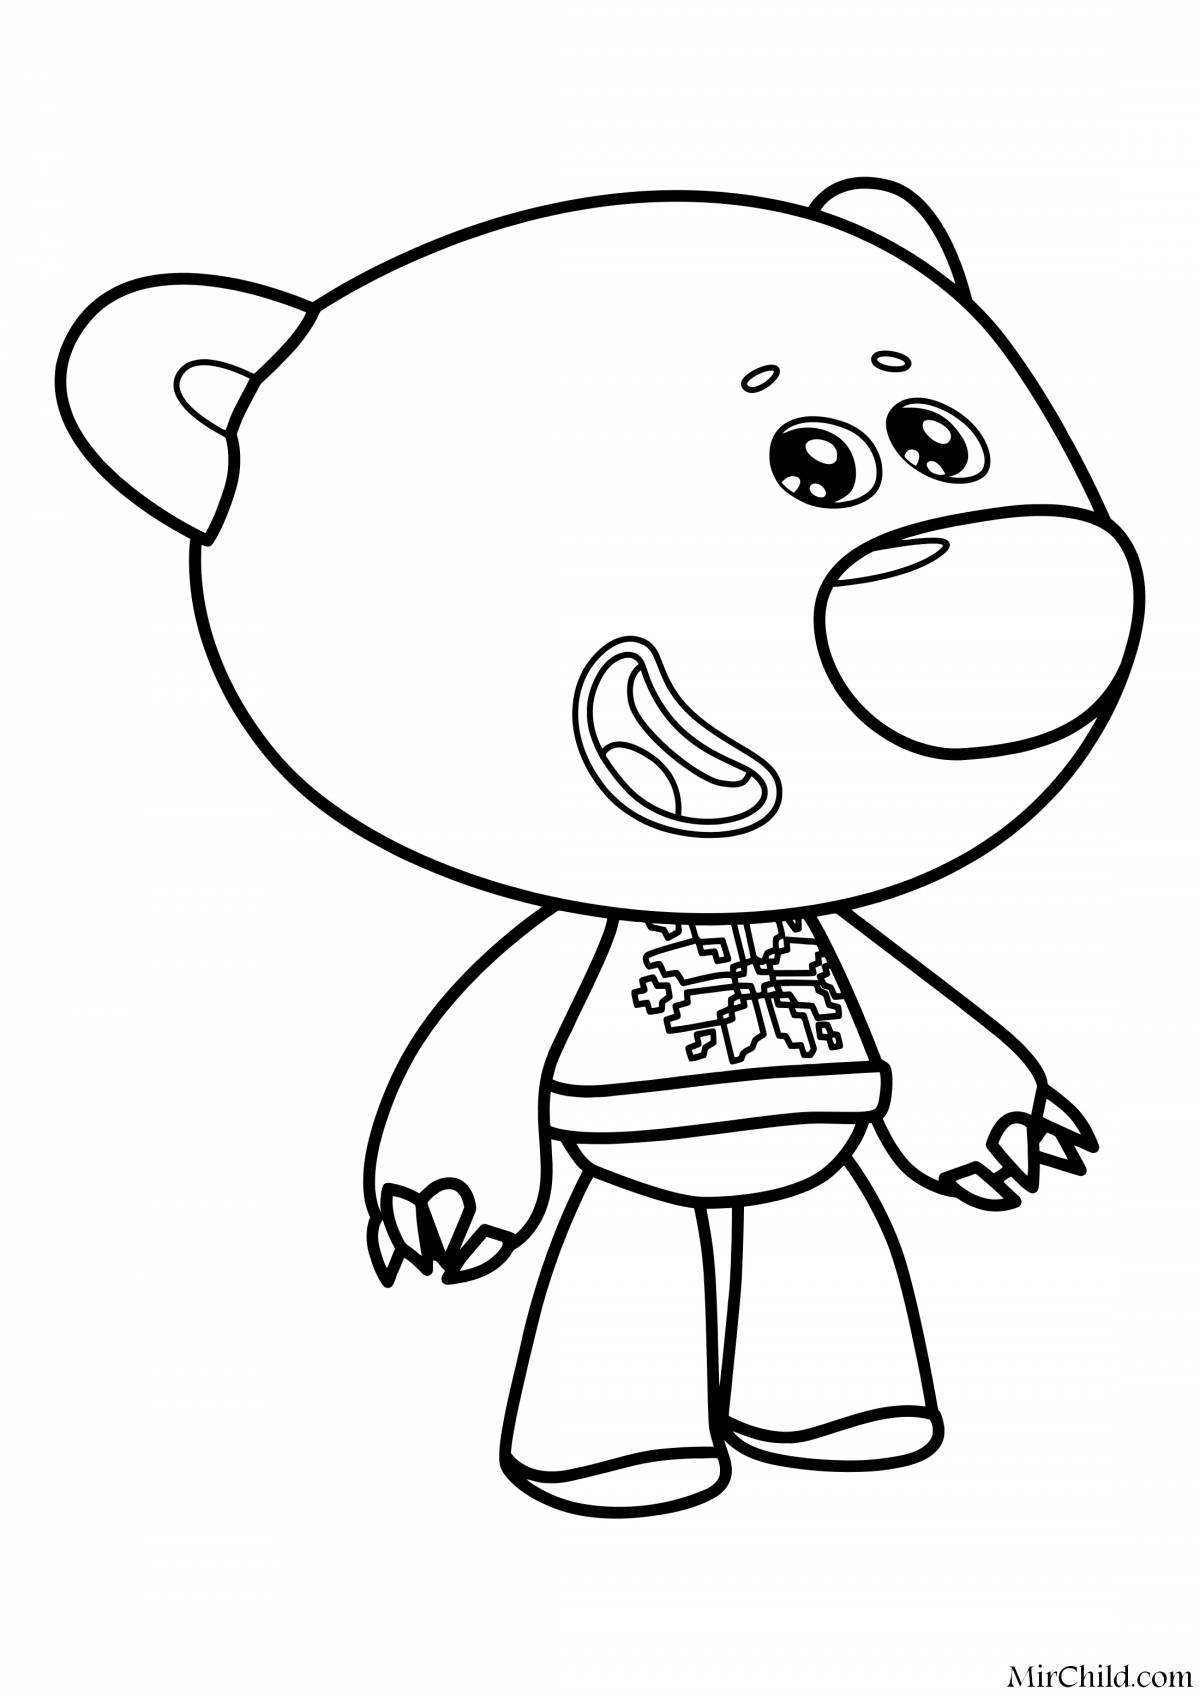 Great coloring page turn on facial expressions